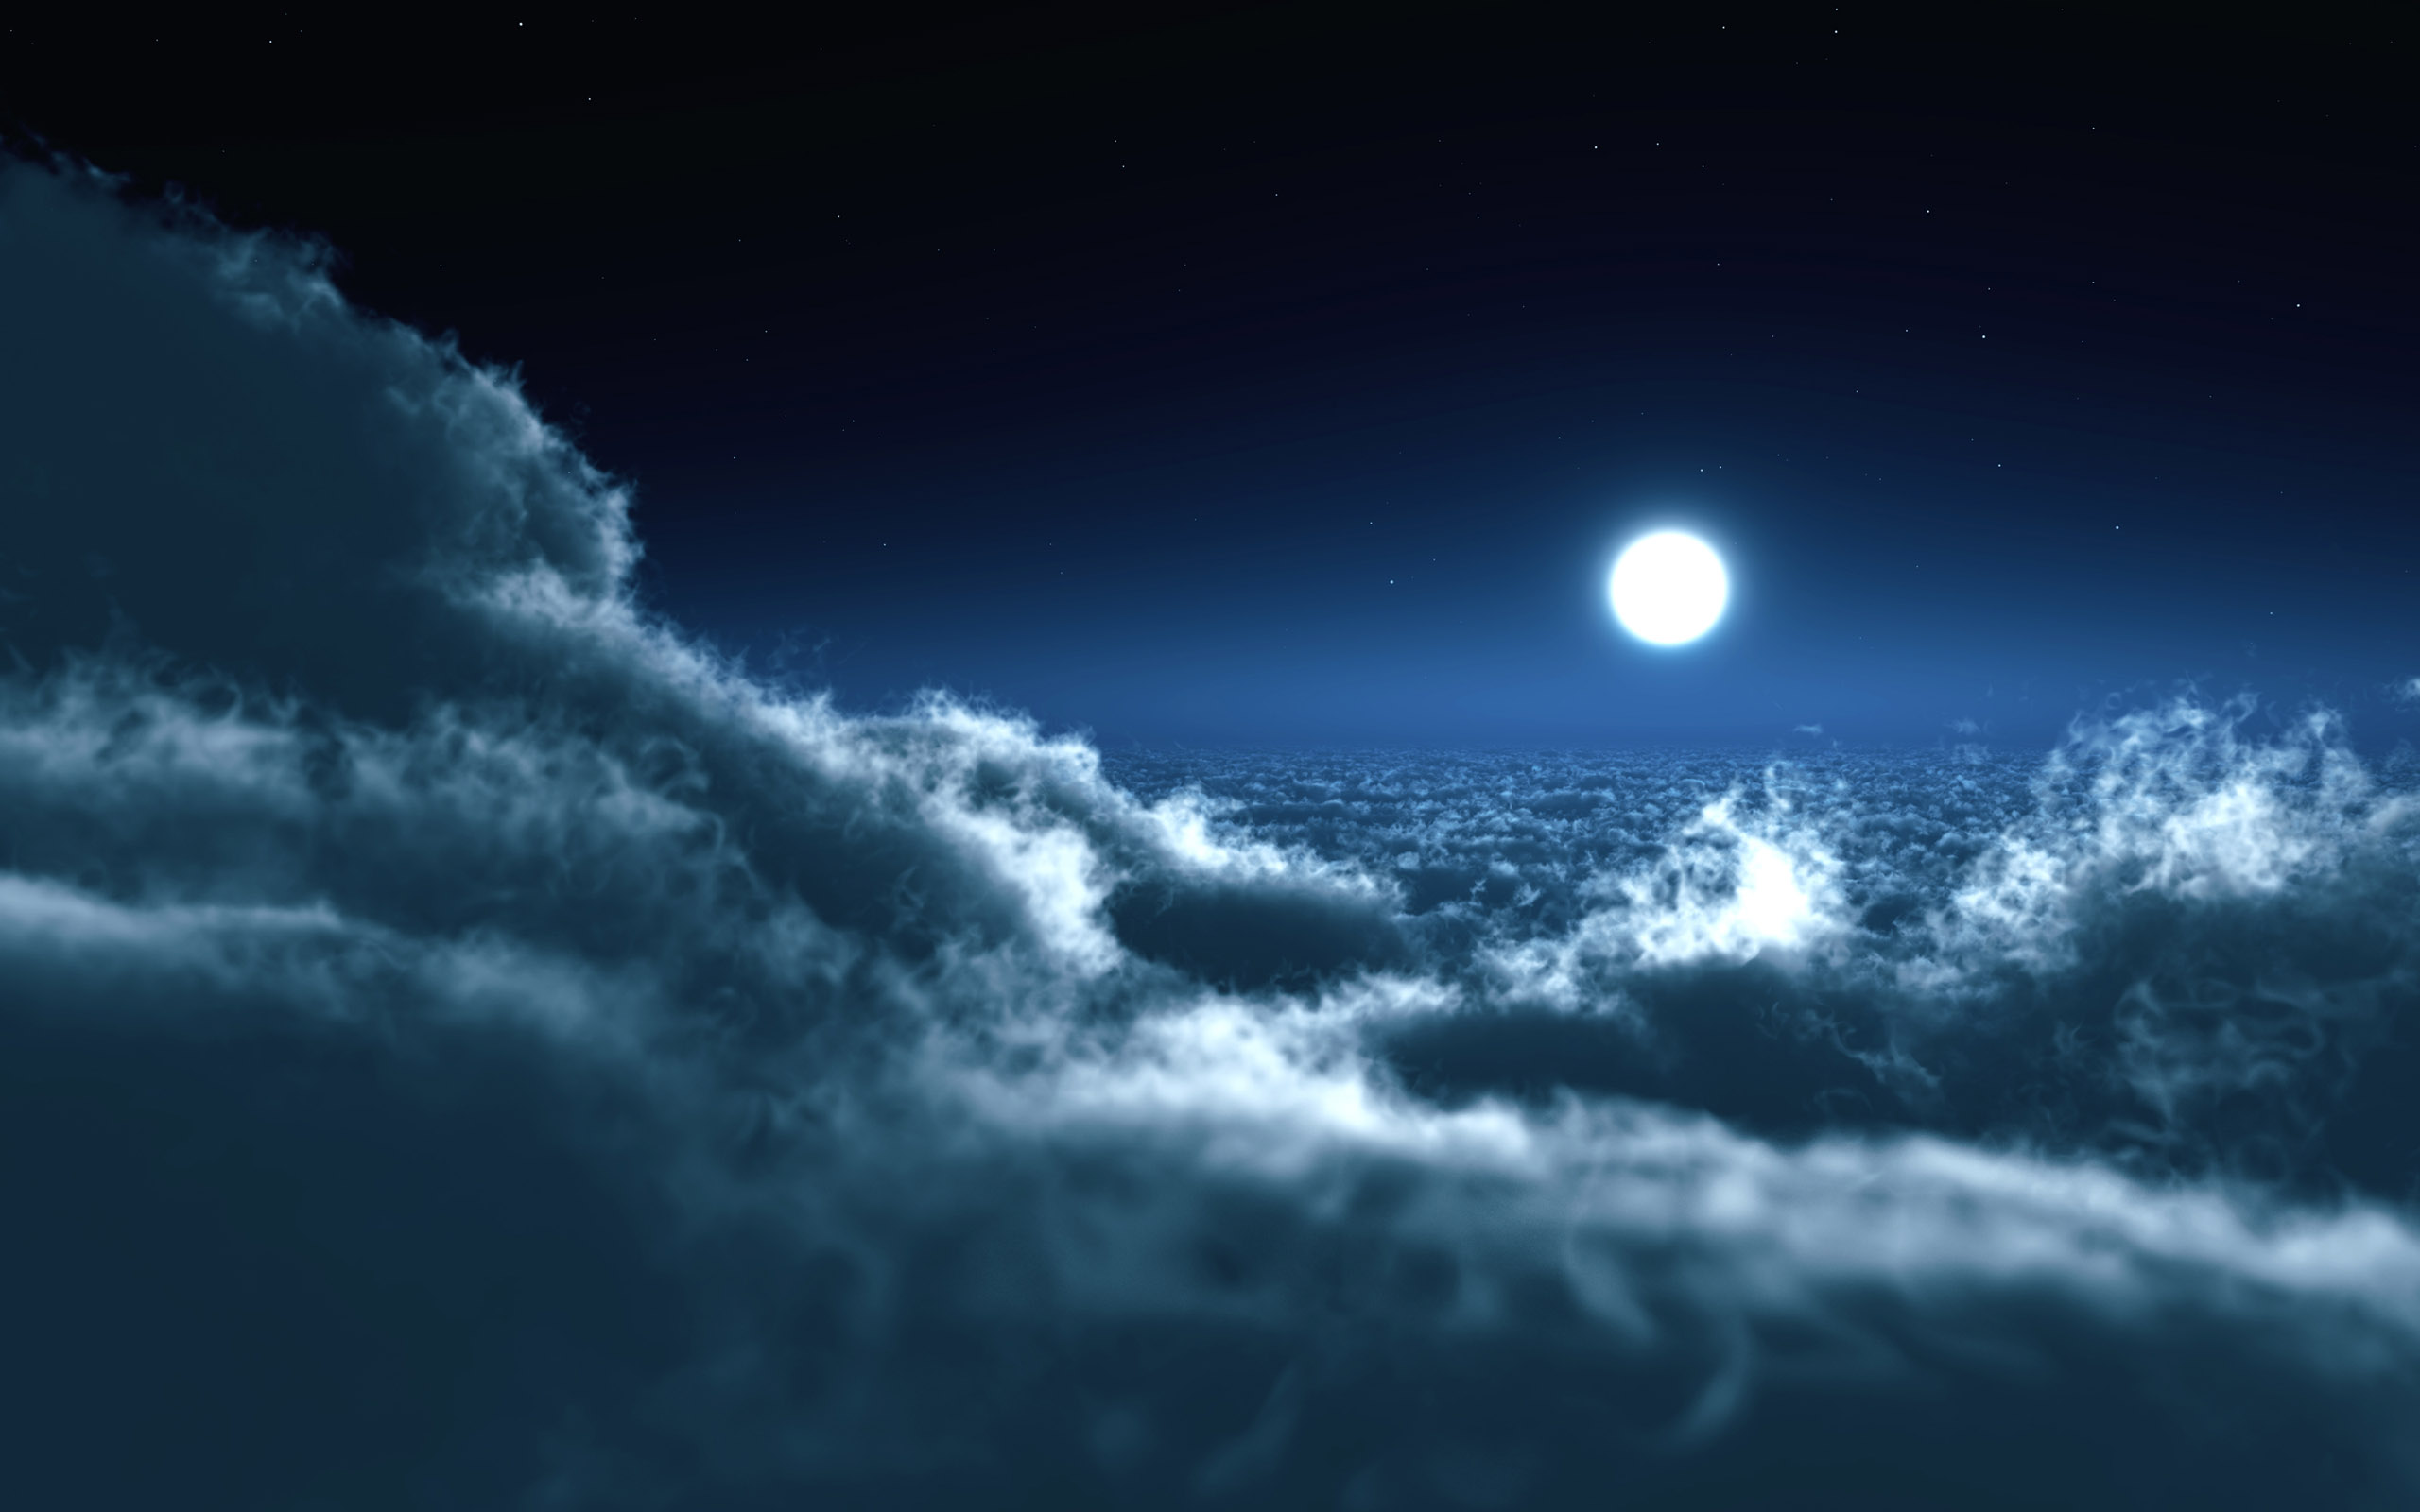  clouds night sky wallpapers and images   wallpapers pictures photos